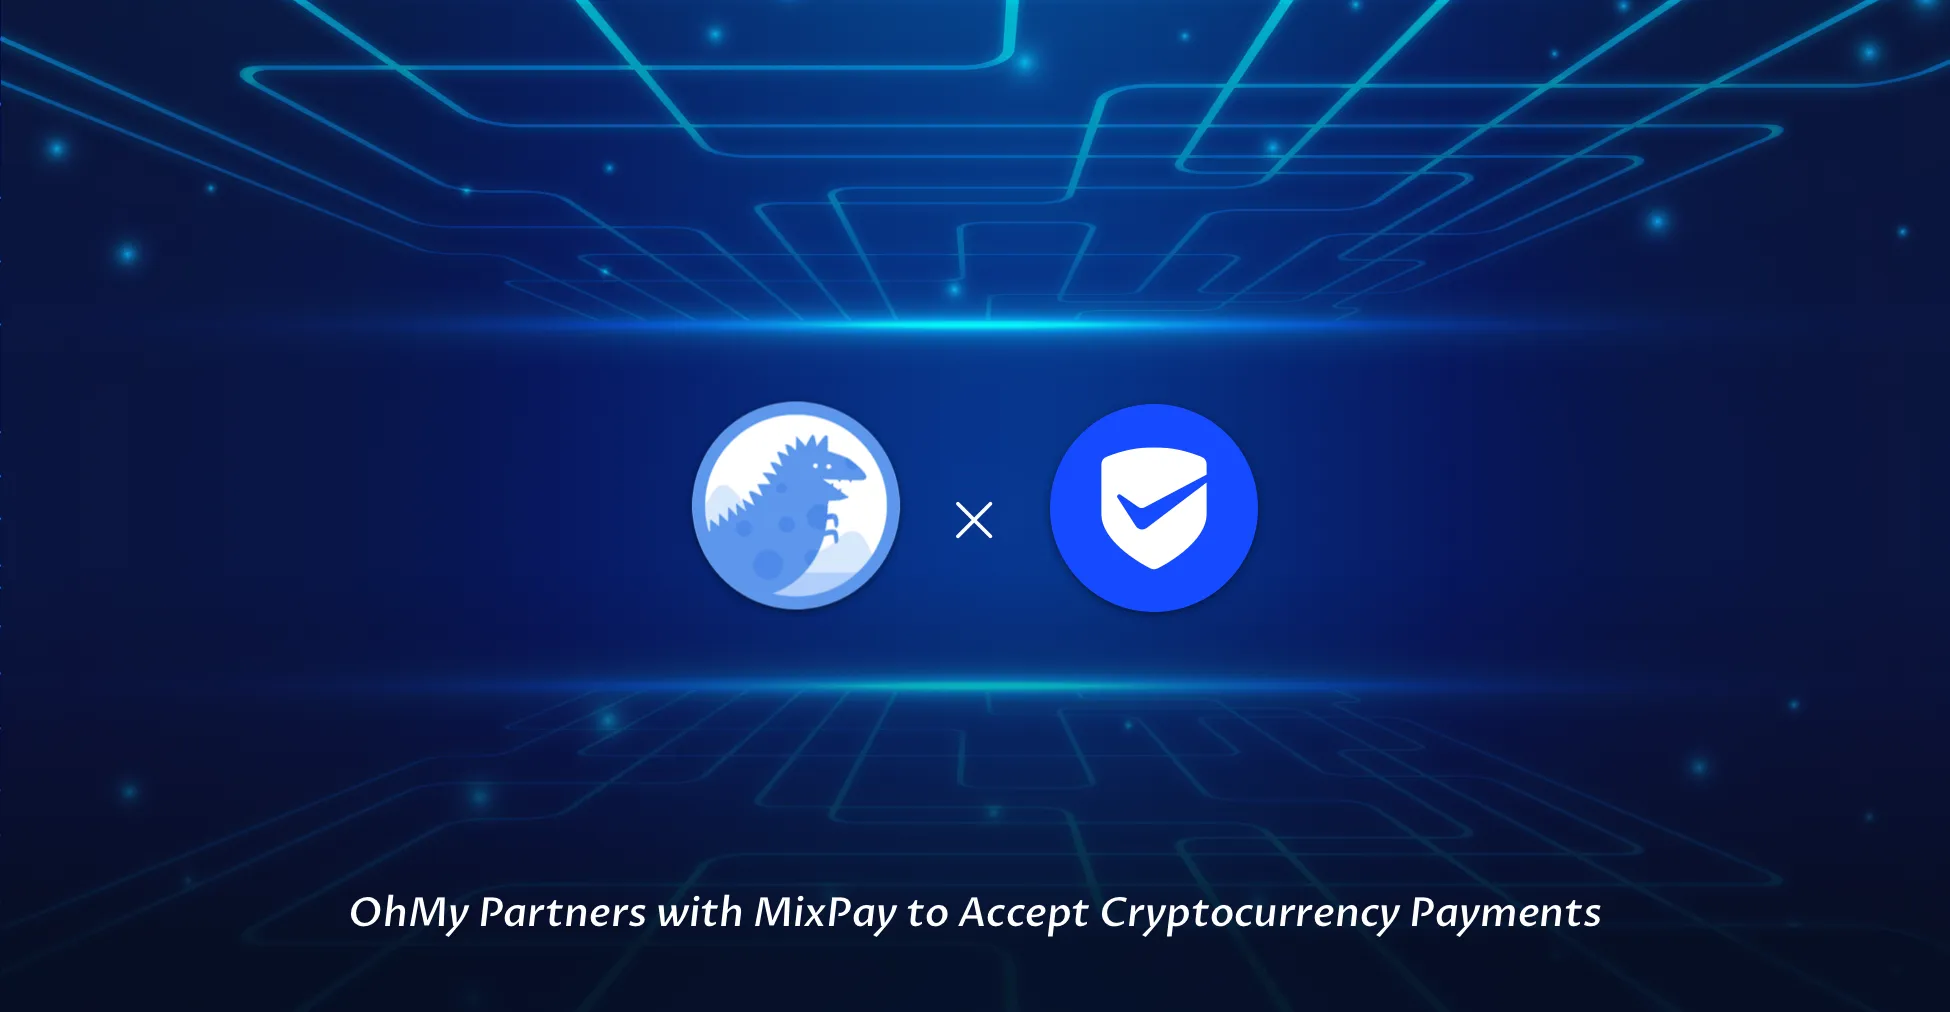 OhMy Partners with MixPay to Accept Cryptocurrency Payments